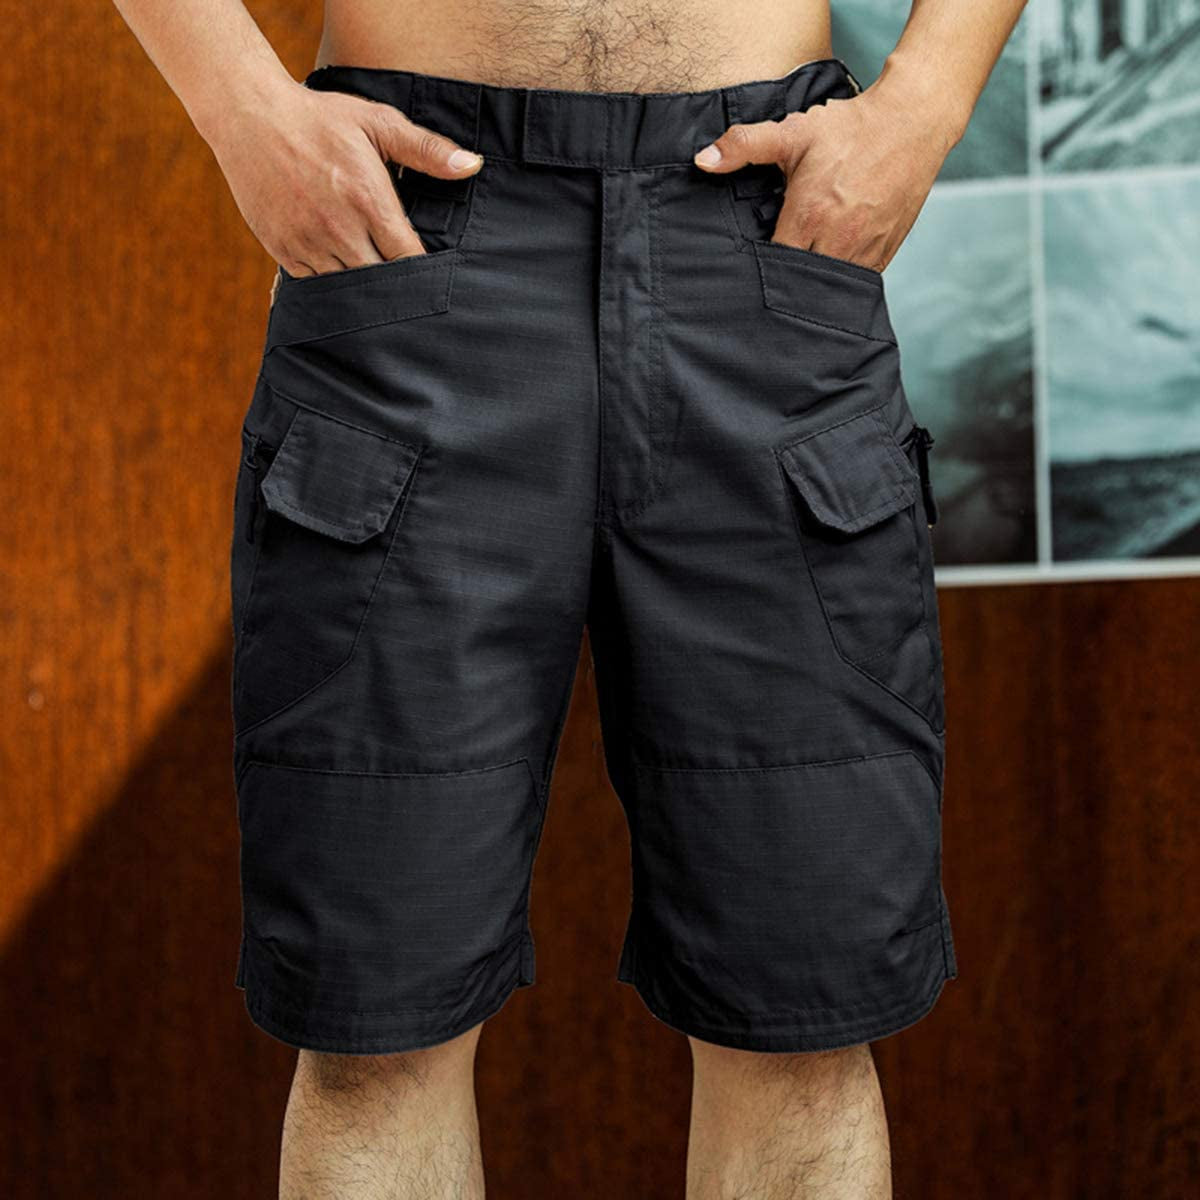  Gincci™  -Tactical Cargo Shorts for MenFits All Sizes Up To 5XL & 50% OFF